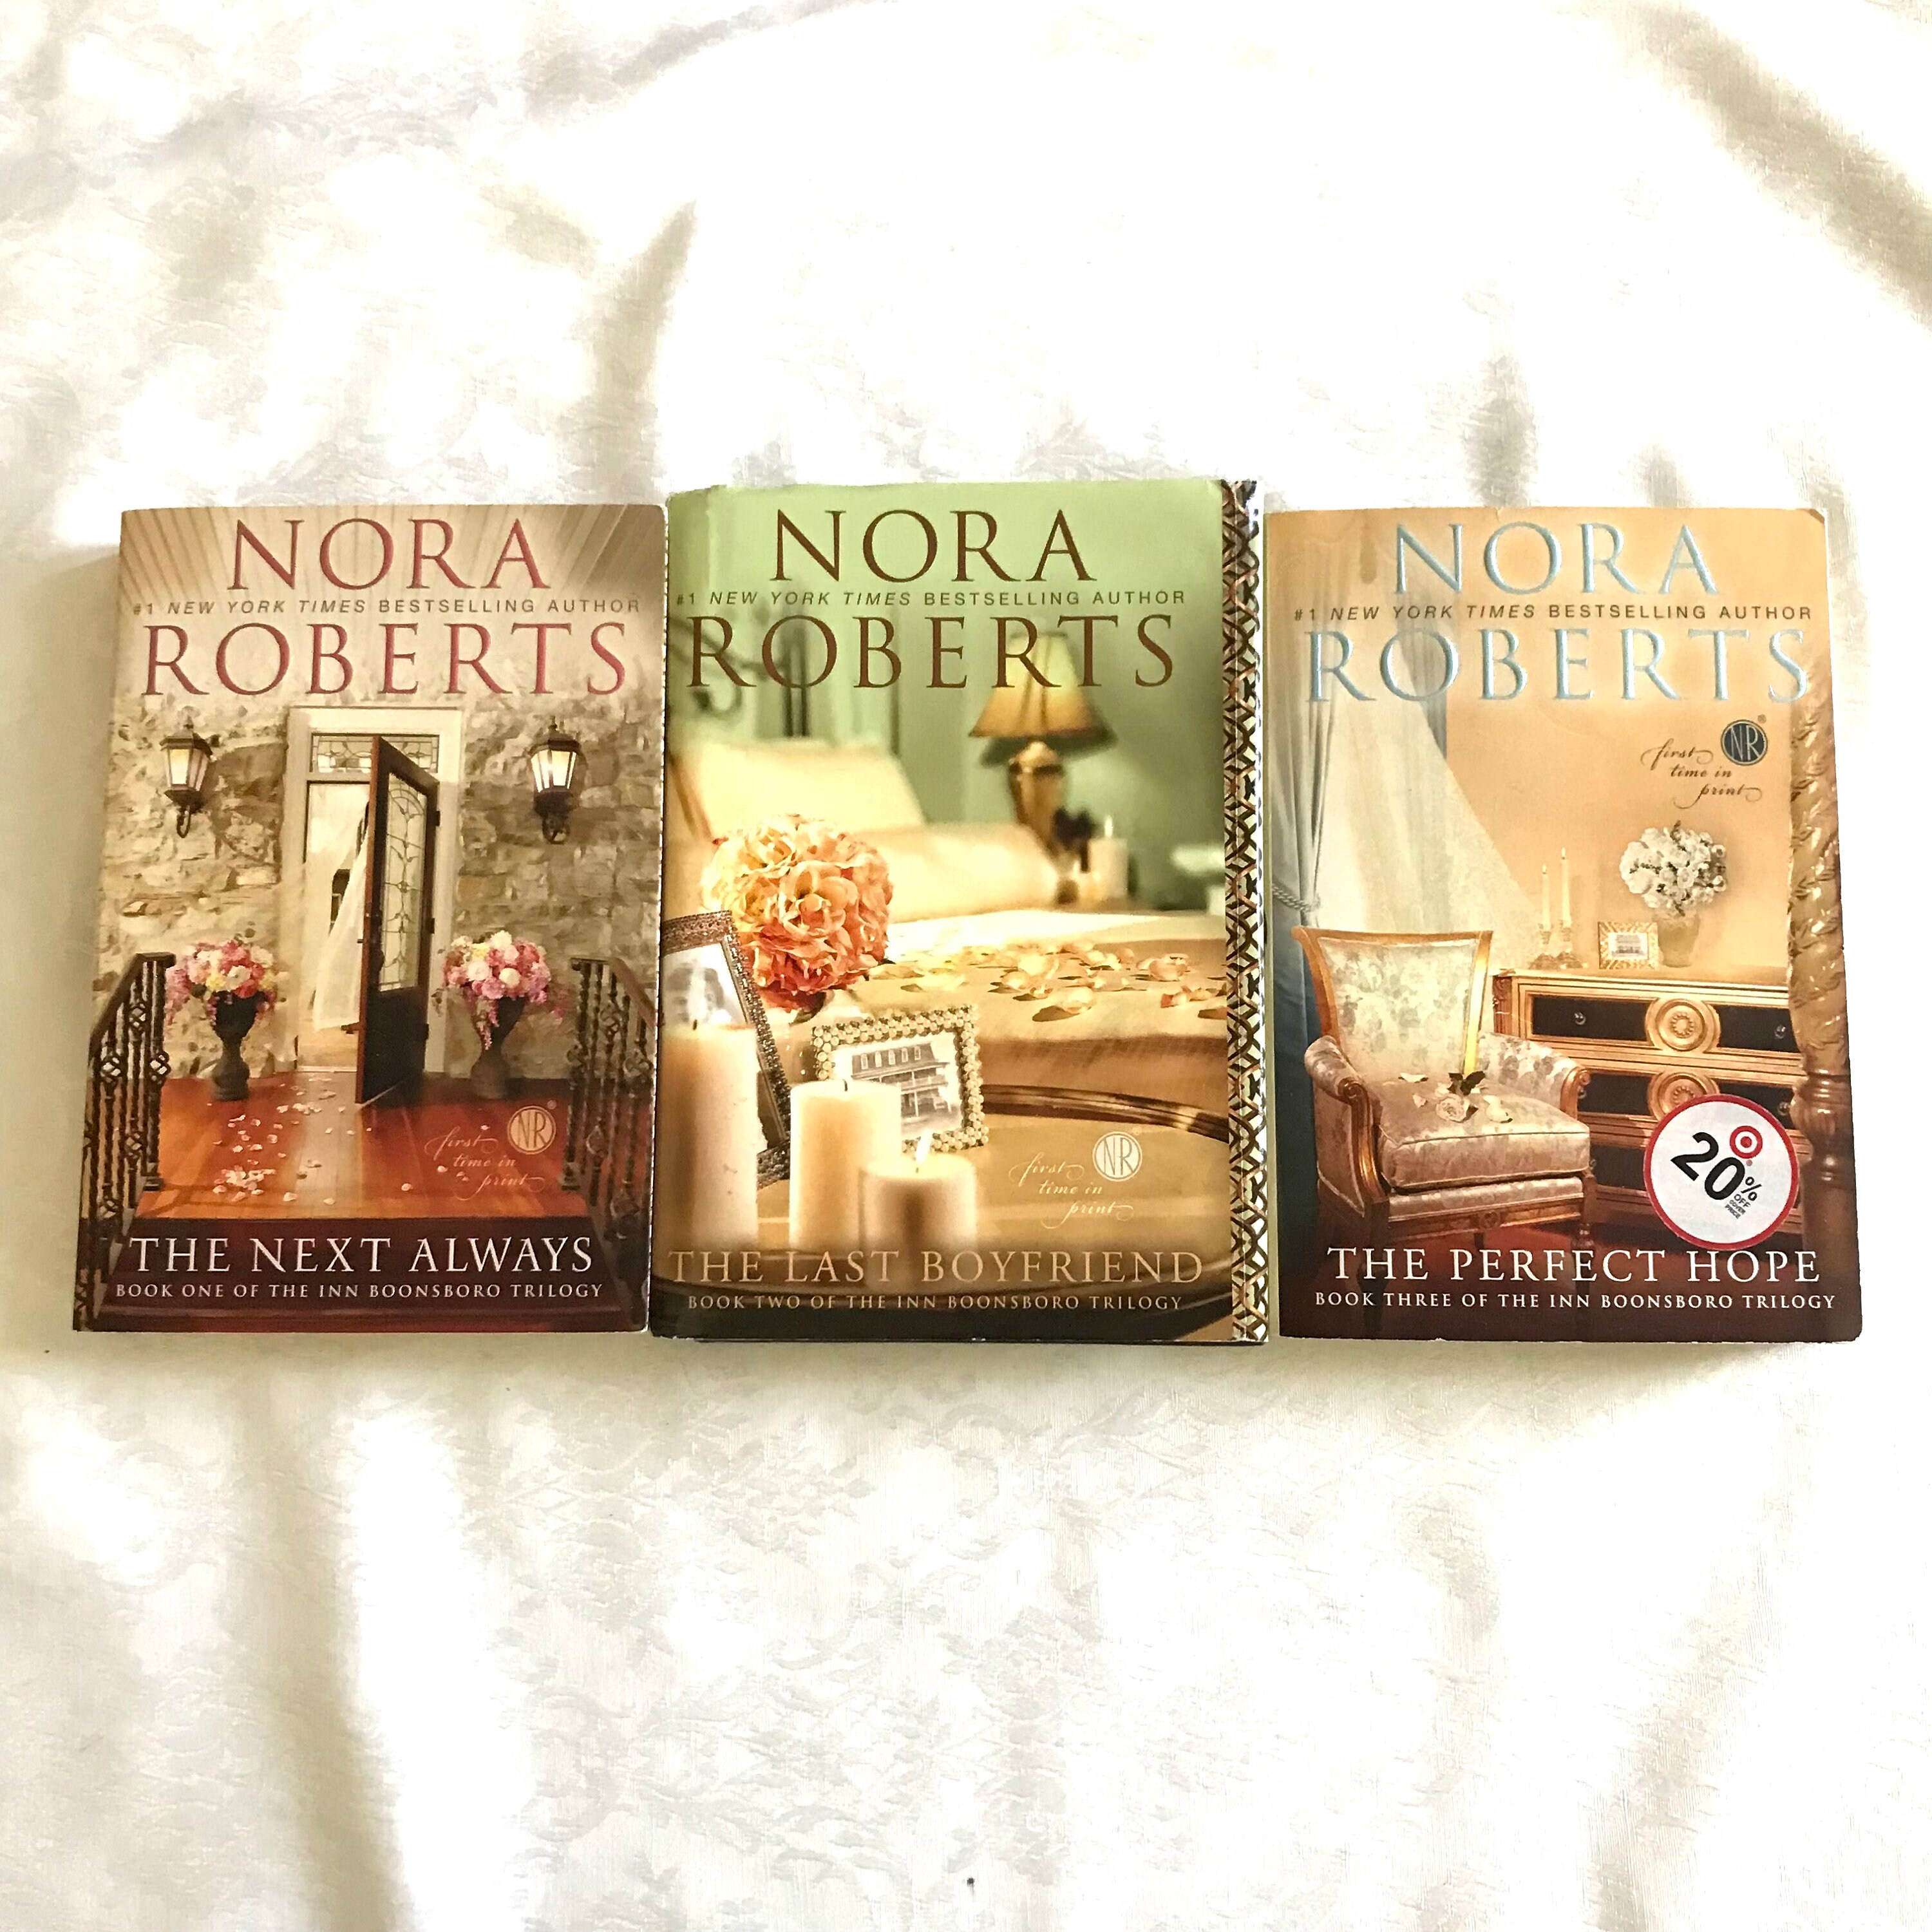 Book Three The Perfect Hope Book Two The Last Boyfriend Book One The Next Always The Inn Boonsboro Trilogy By Nora Roberts Complete 3-Book Set 